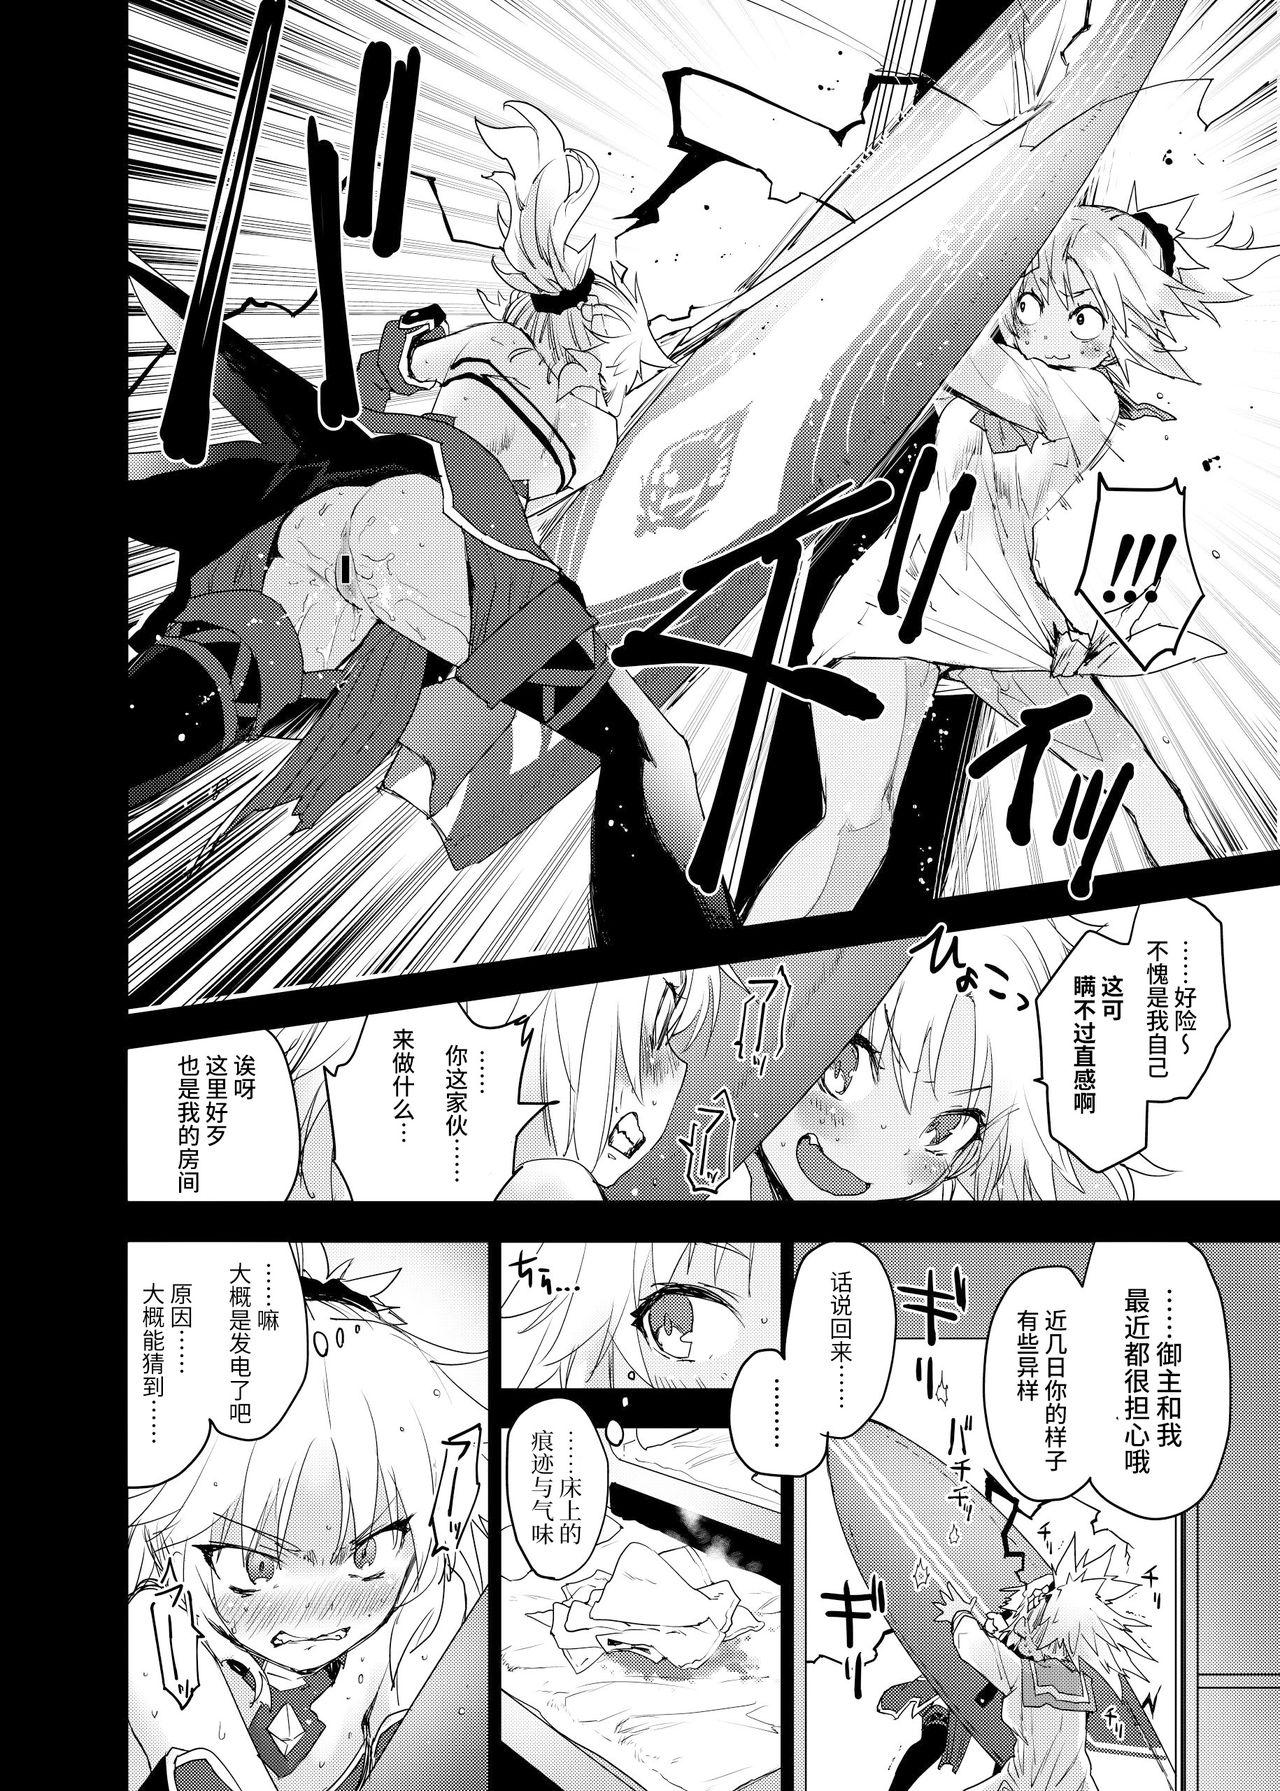 Foda With My Honey Knight - Fate grand order Best Blowjob Ever - Page 11